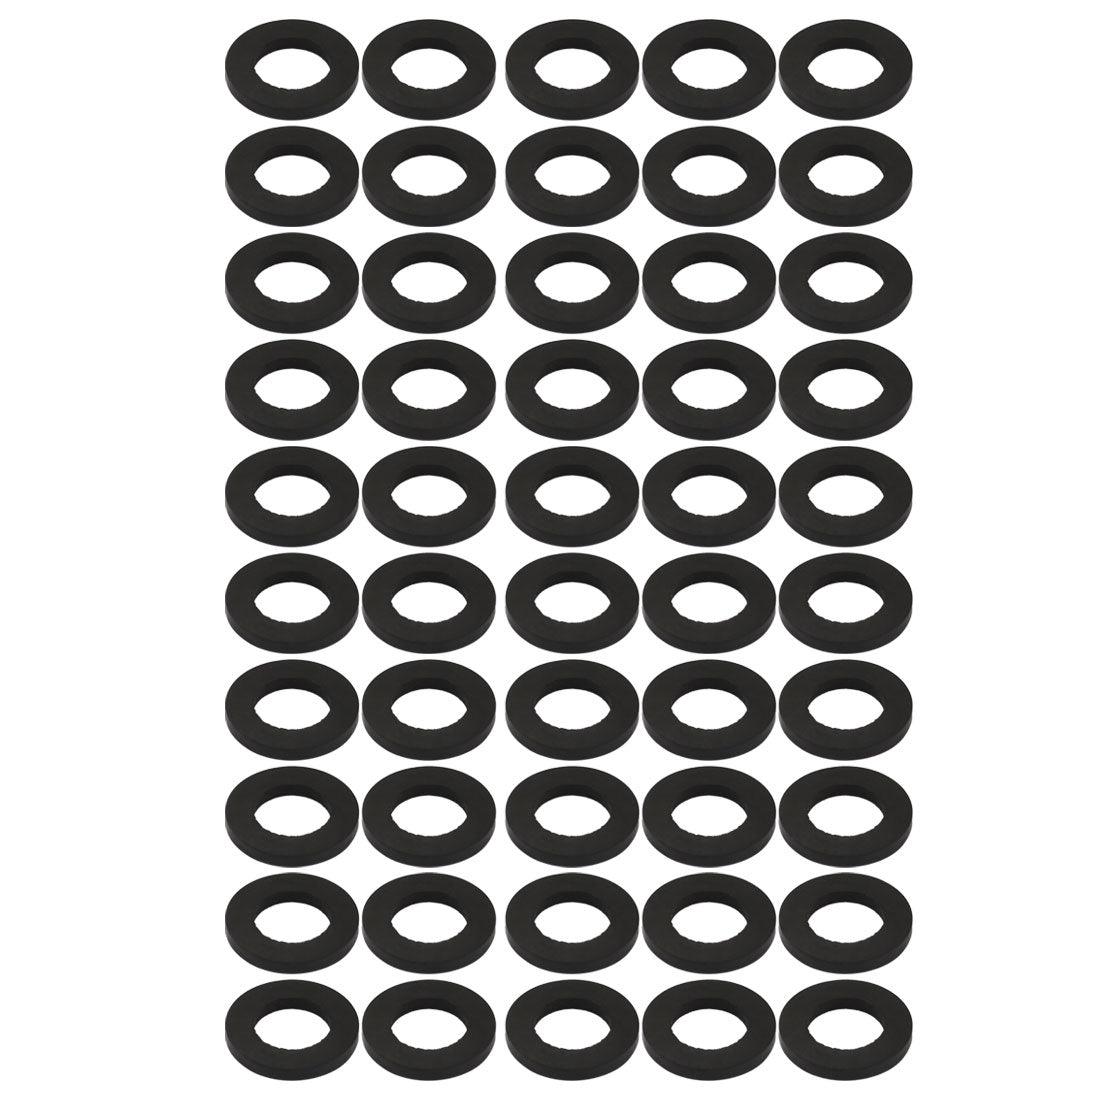 Uxcell Uxcell 50pcs Black Rubber Round Flat Washer Assortment Size 8x21x2mm Flat Washer